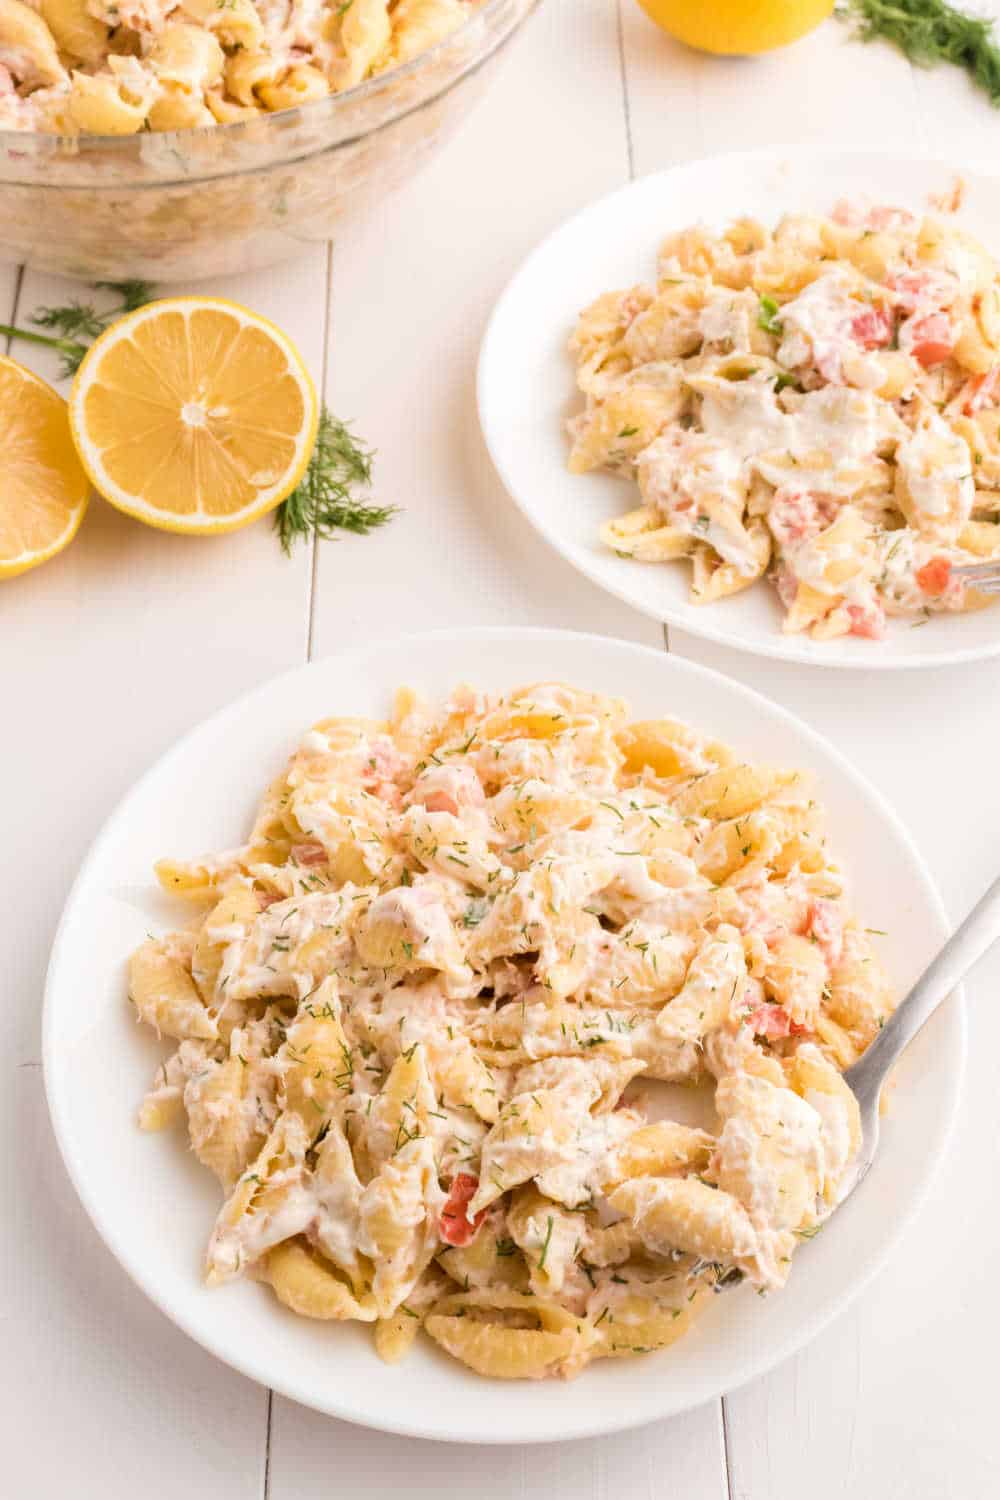 A plate of shrimp pasta salad with a fork.